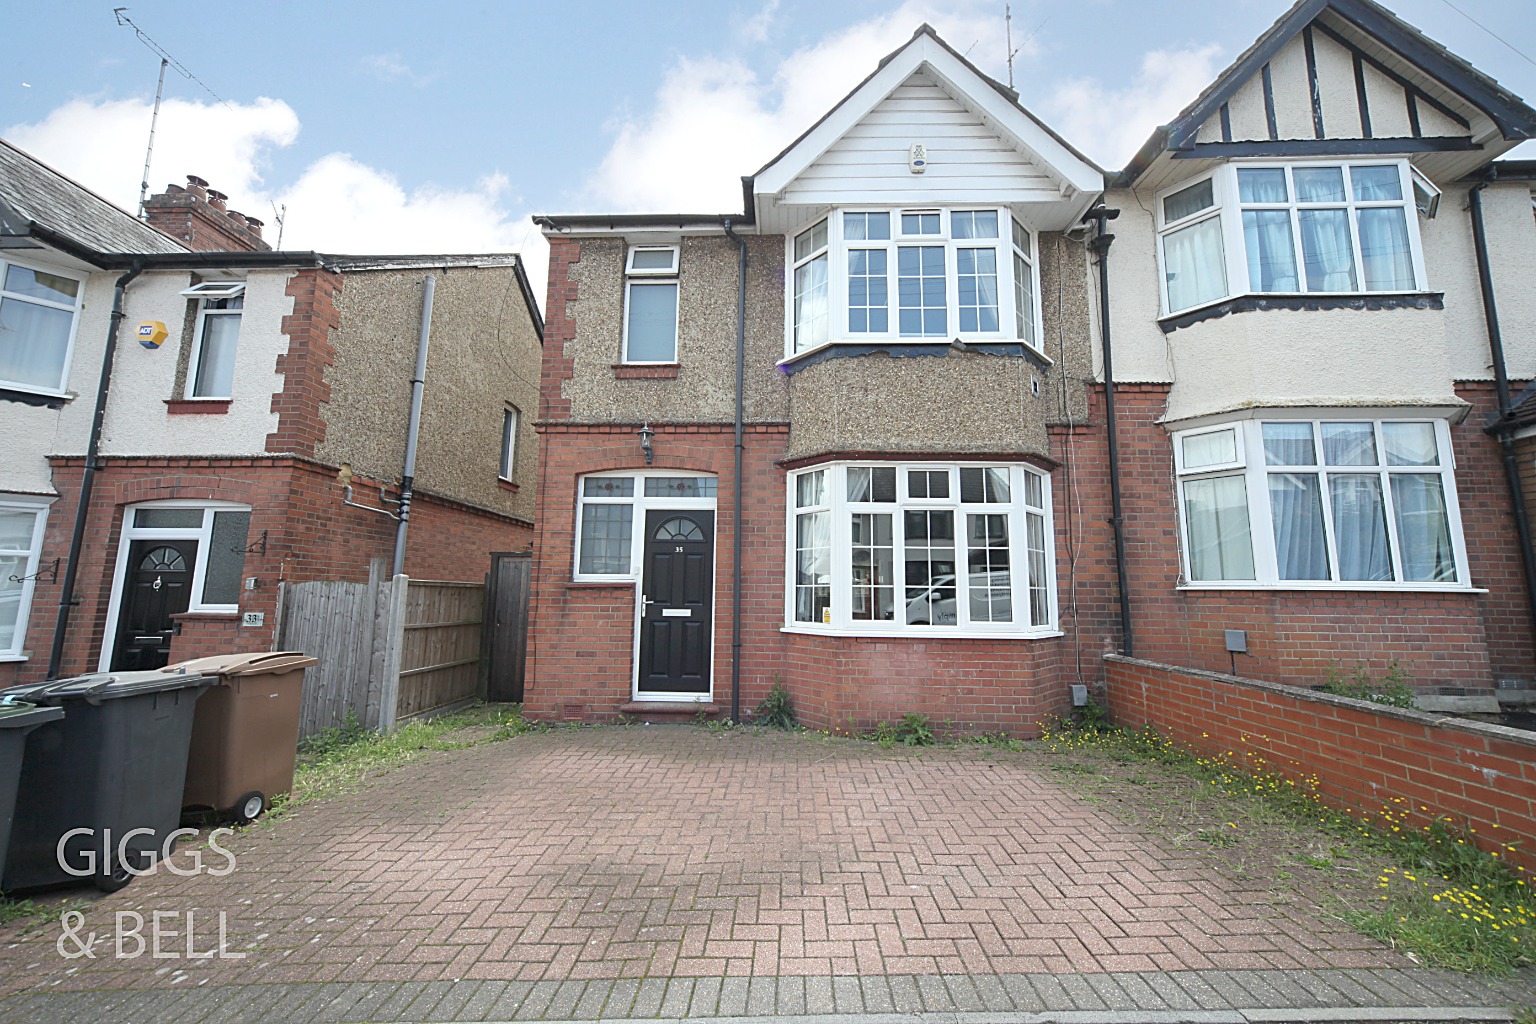 3 bed semi-detached house for sale in Alton Road, Luton, LU1 